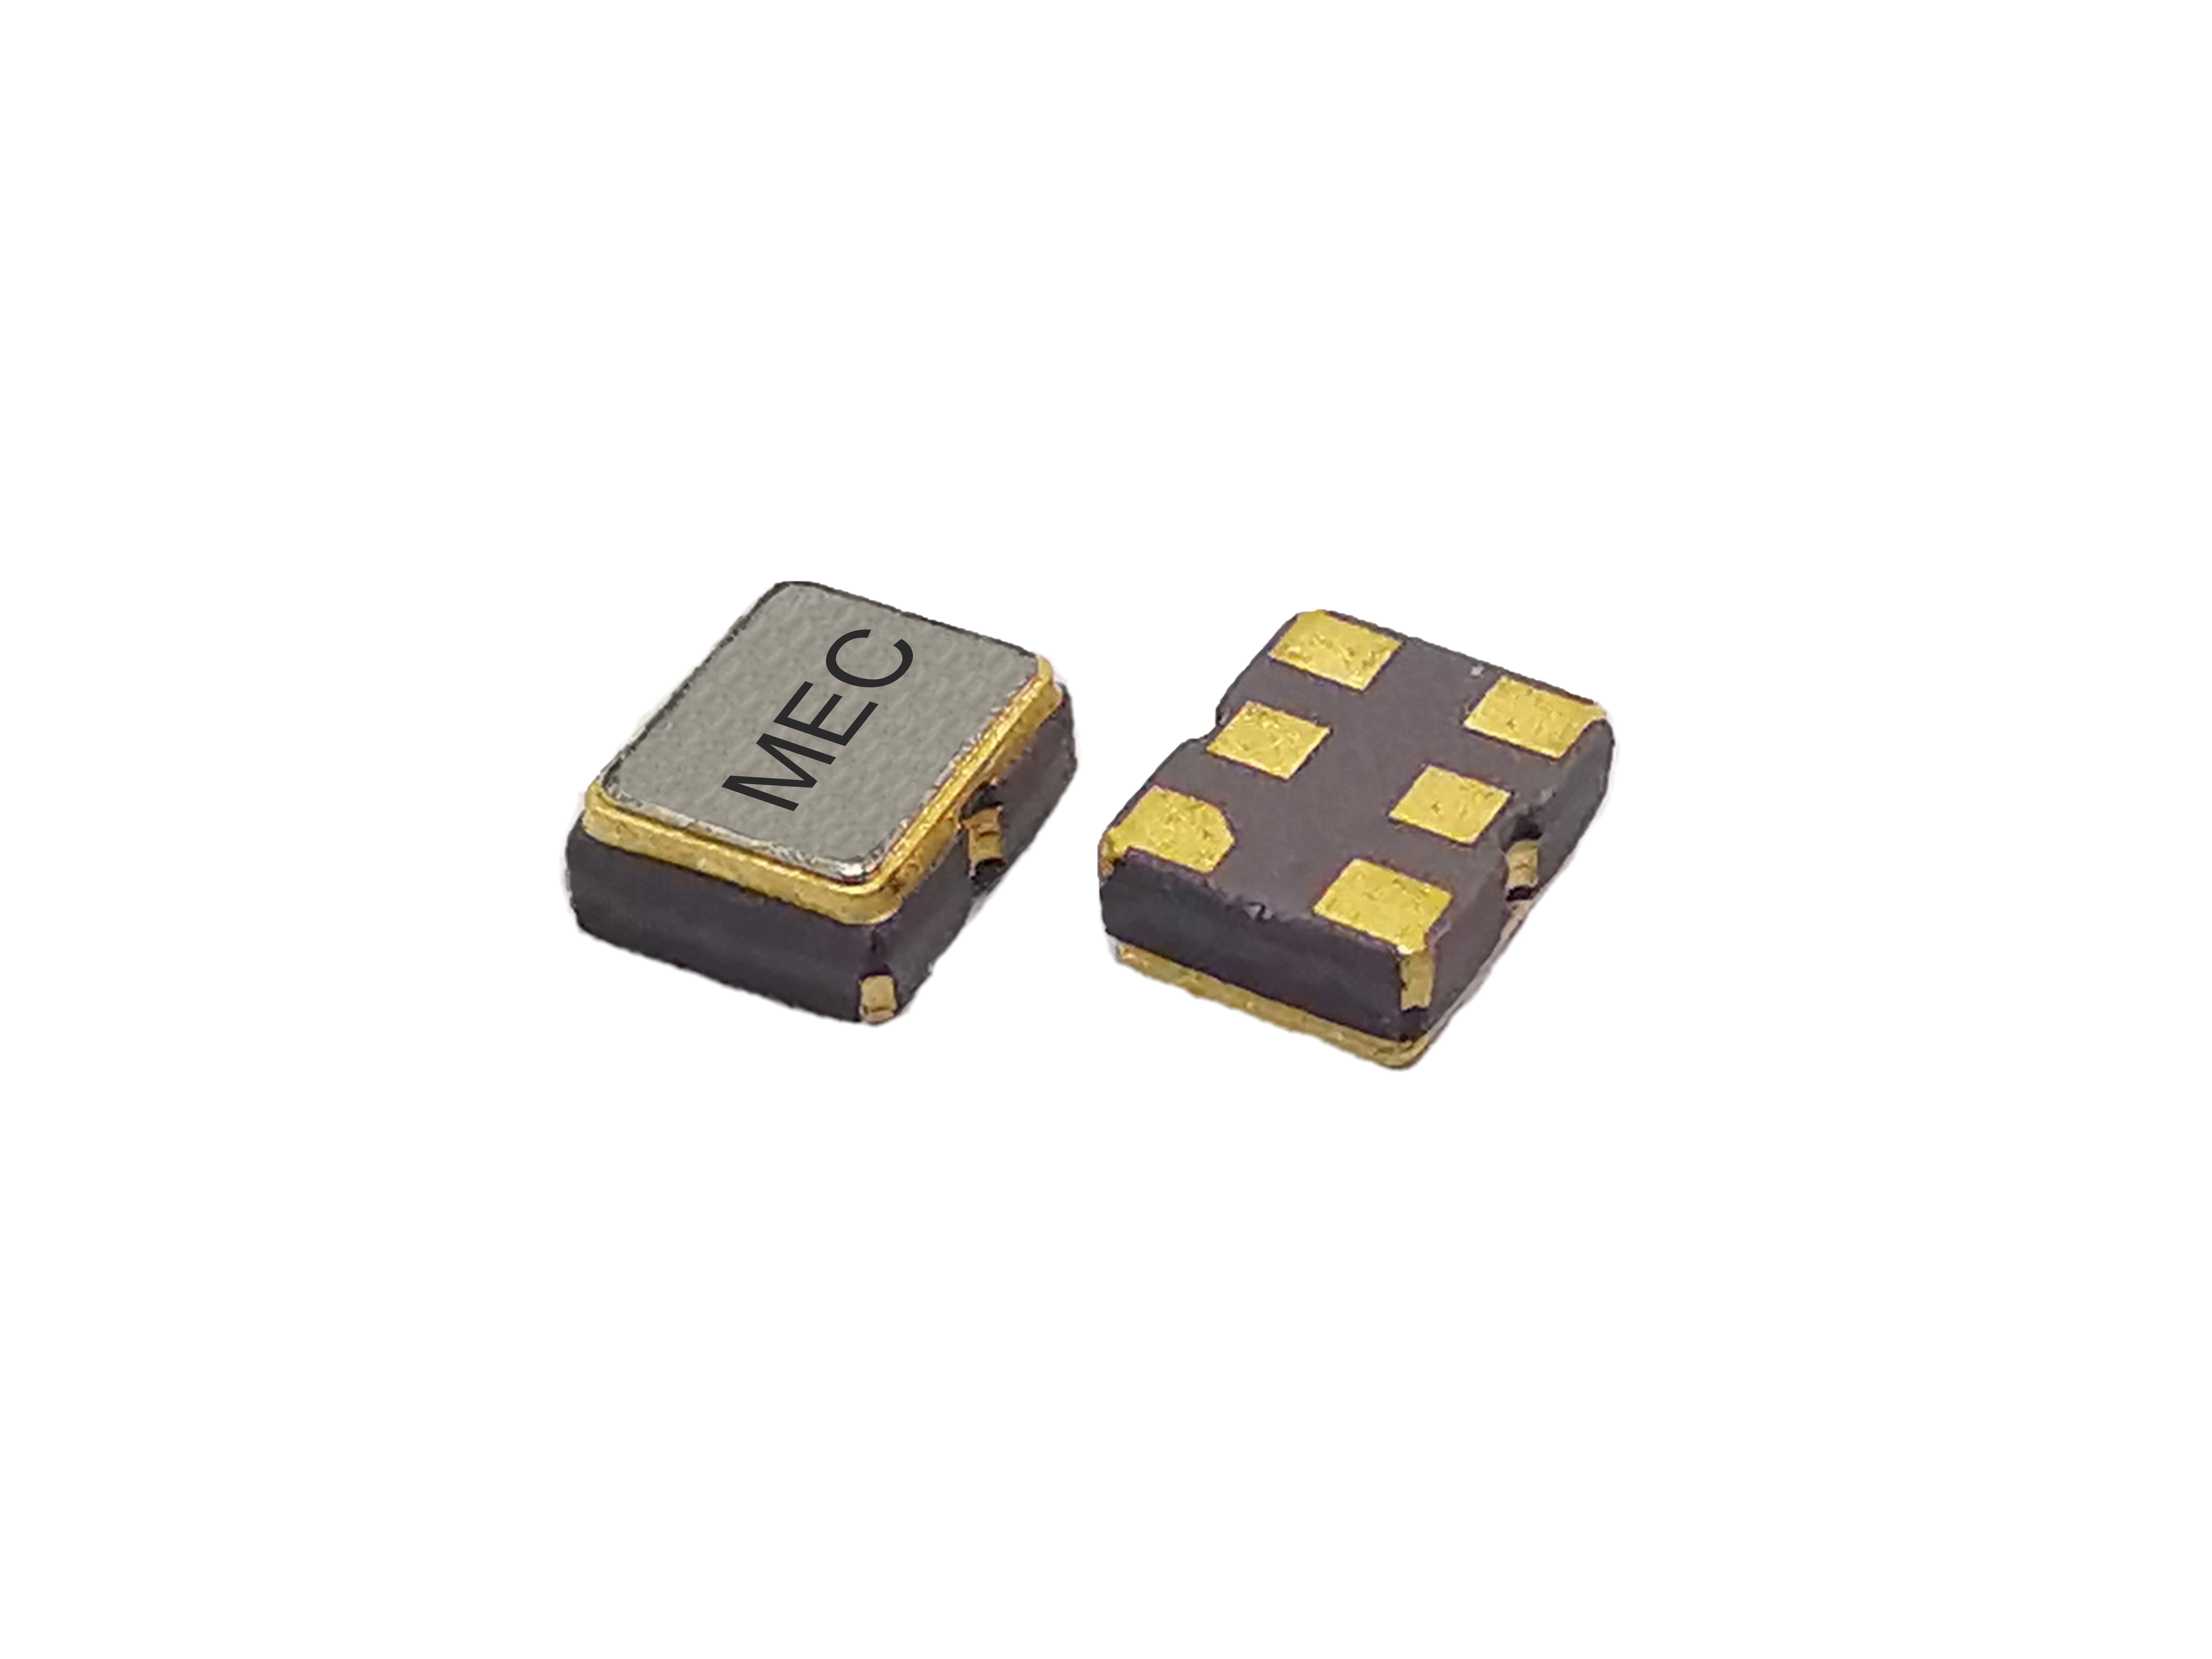 HCEK226 2520 2.5V Superb Phase Noise Differential With No PLL HCSL SMD Crystal Oscillator